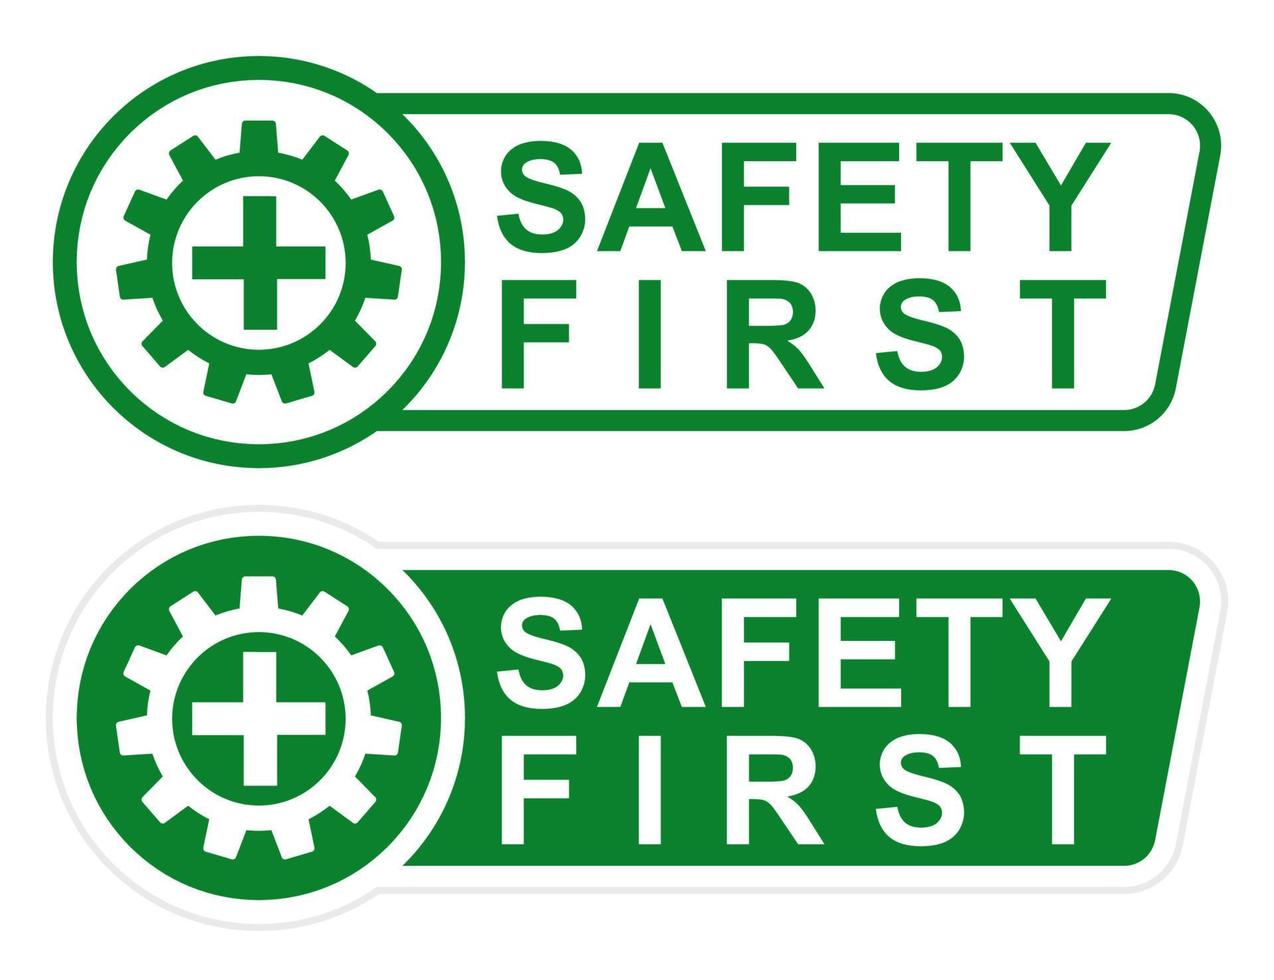 simple safety first sign printable signage design for safely workers in factory construction place banner poster vector